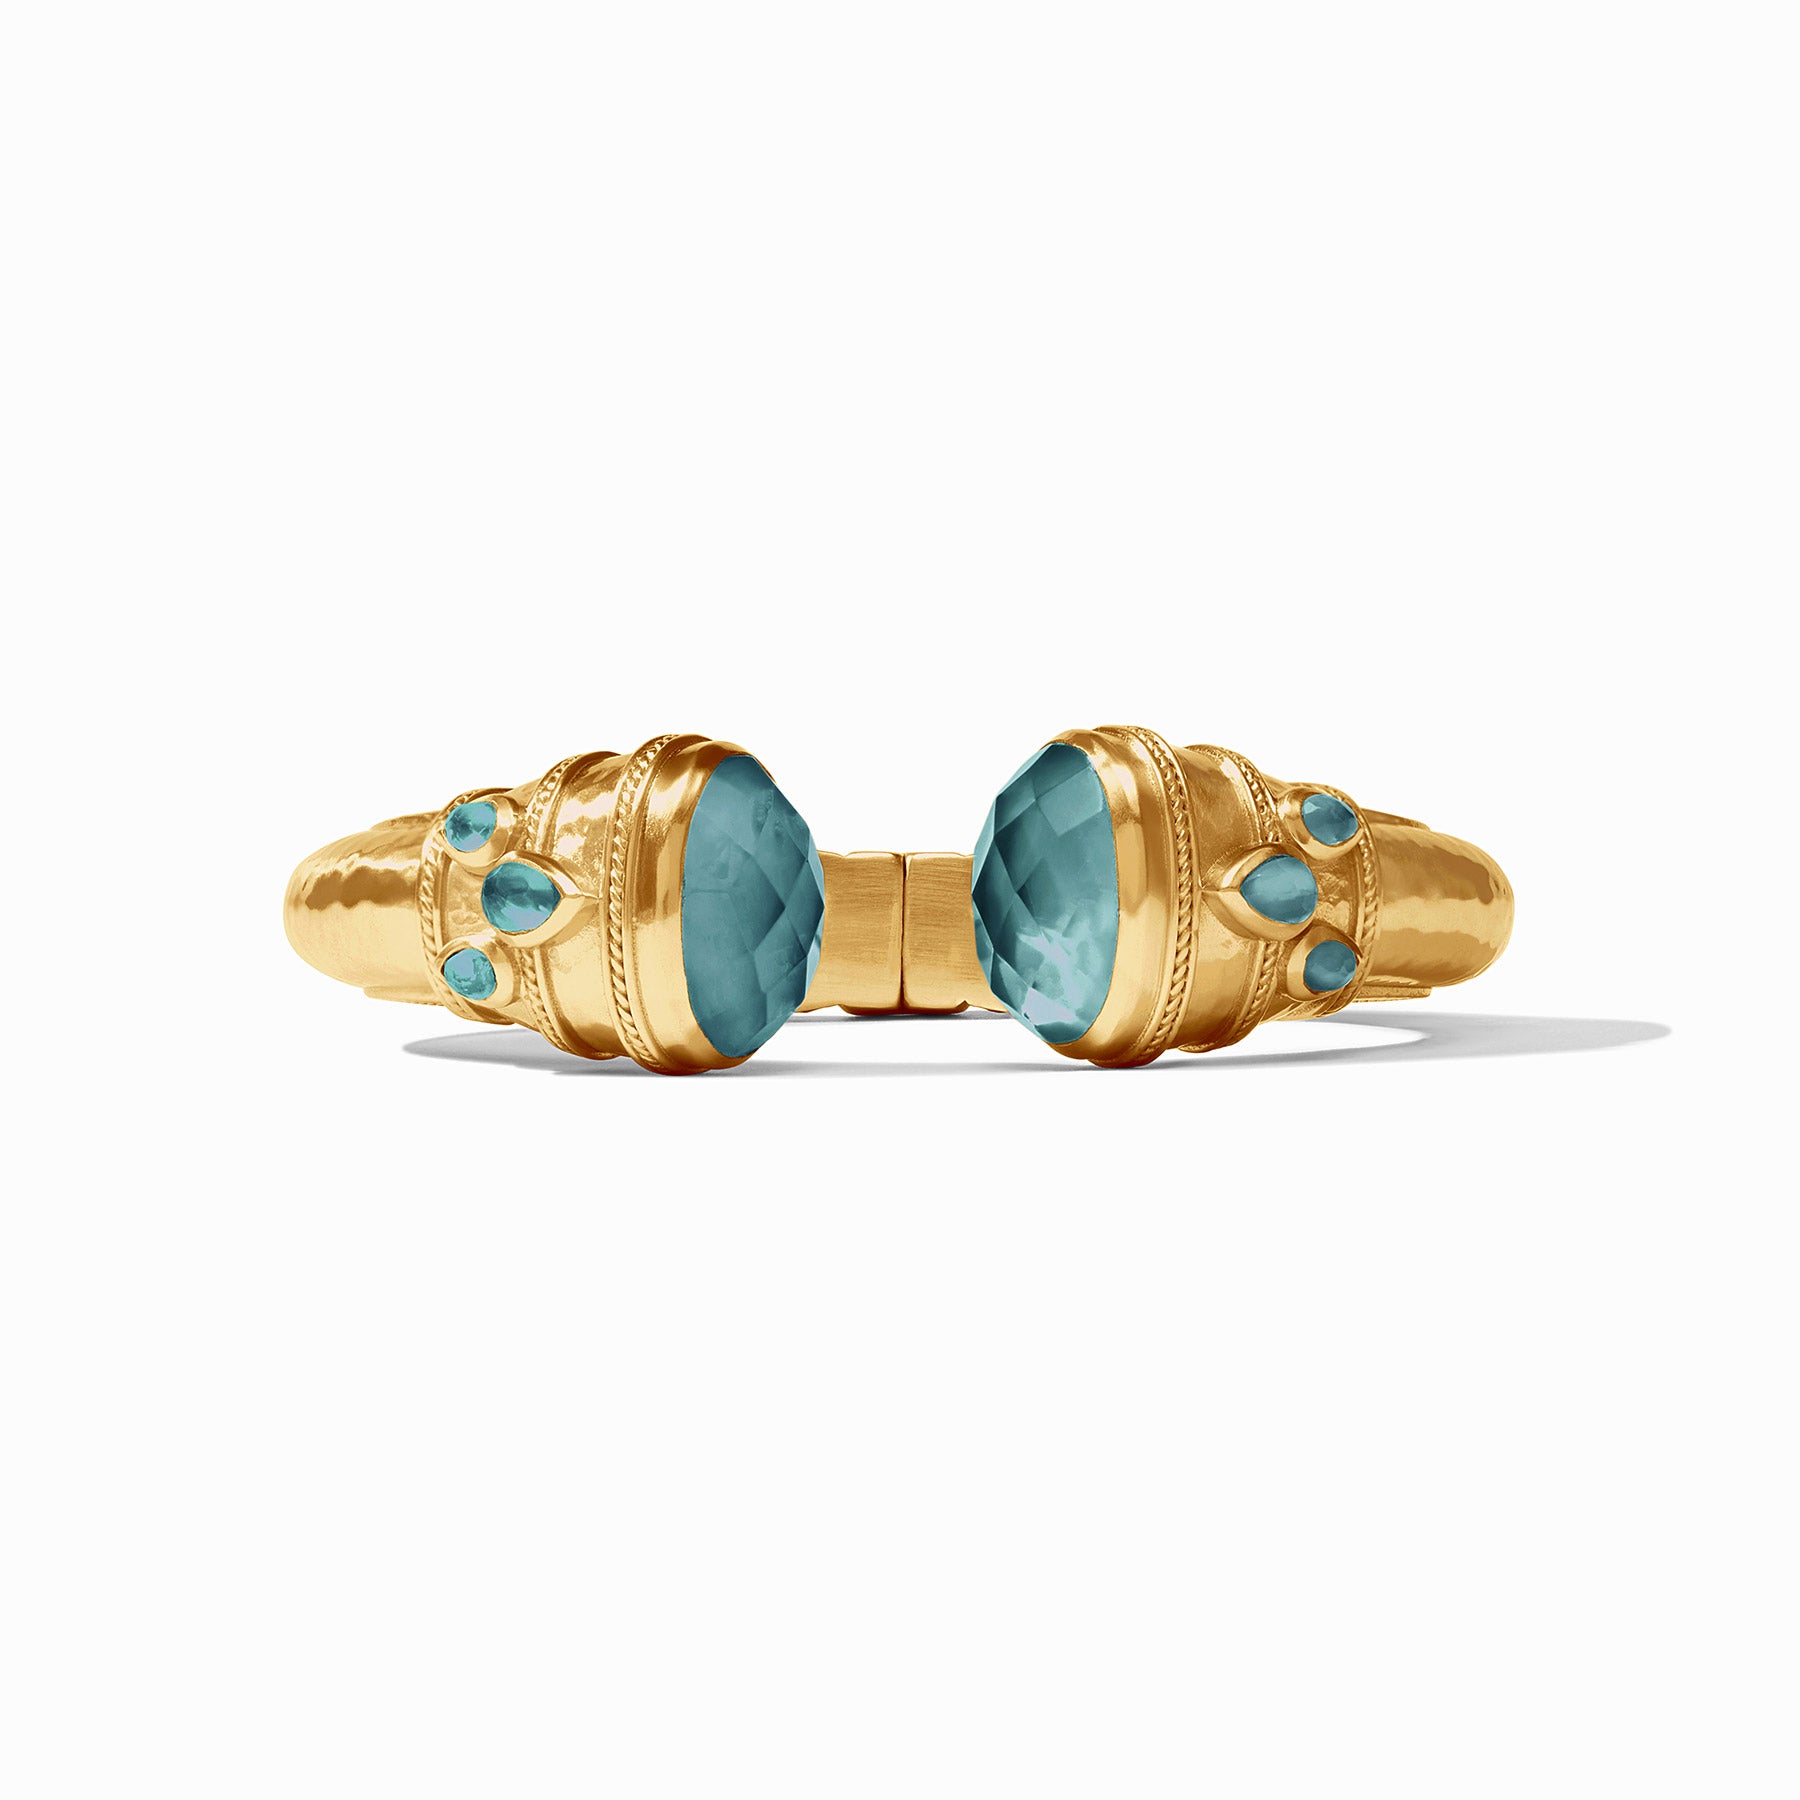 Julie Vos - Cannes Cuff, Iridescent Peacock Blue / Small